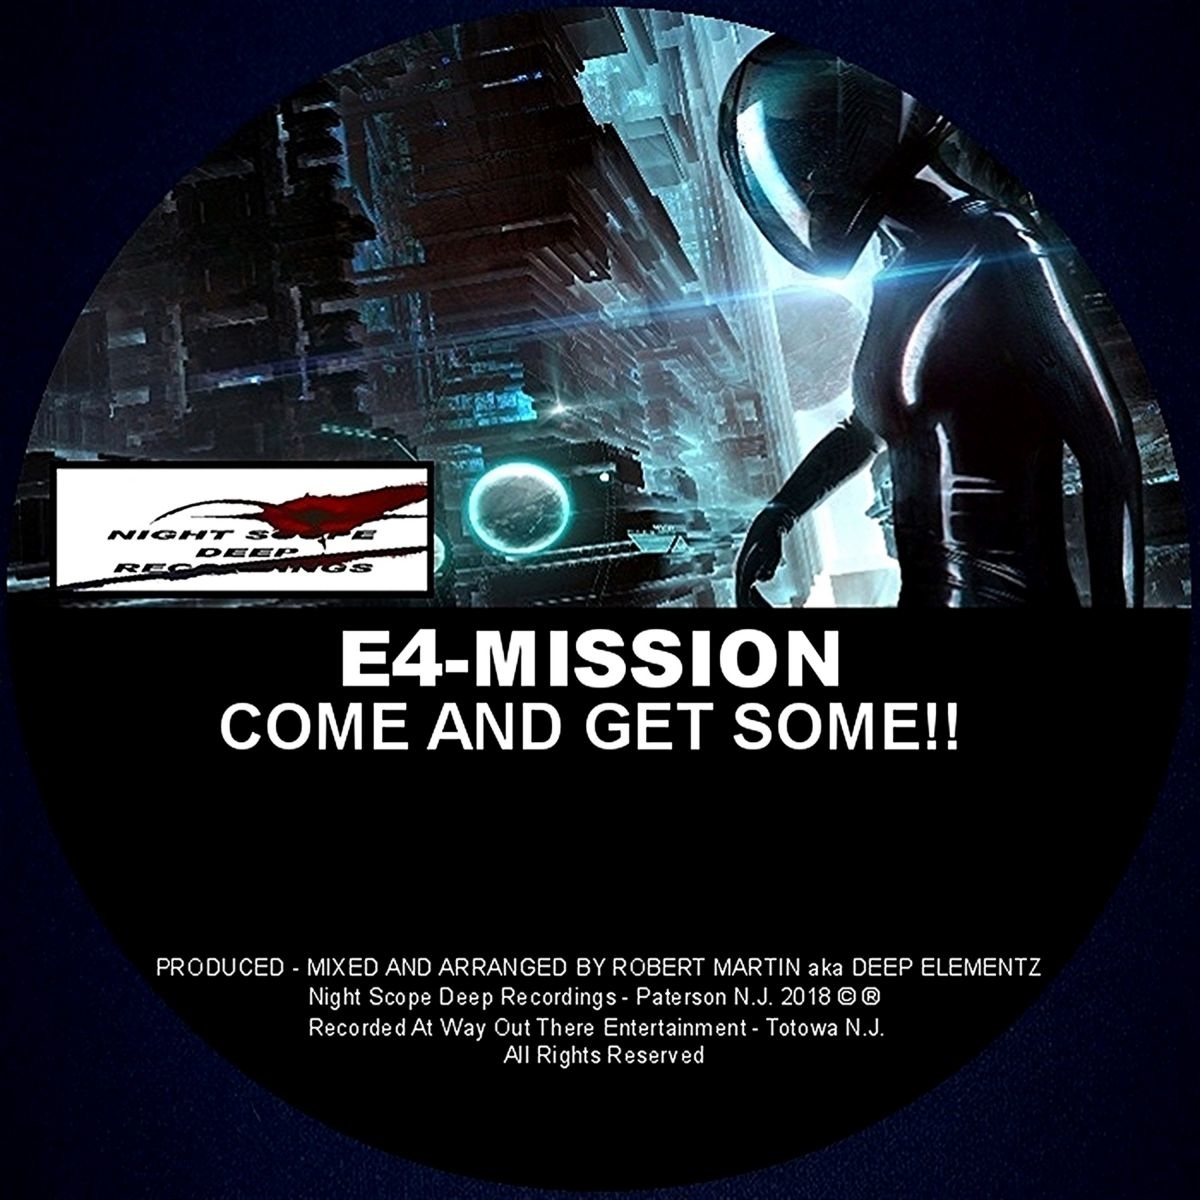 E4-Mission - Come And Get Some!! / Night Scope Deep Recordings